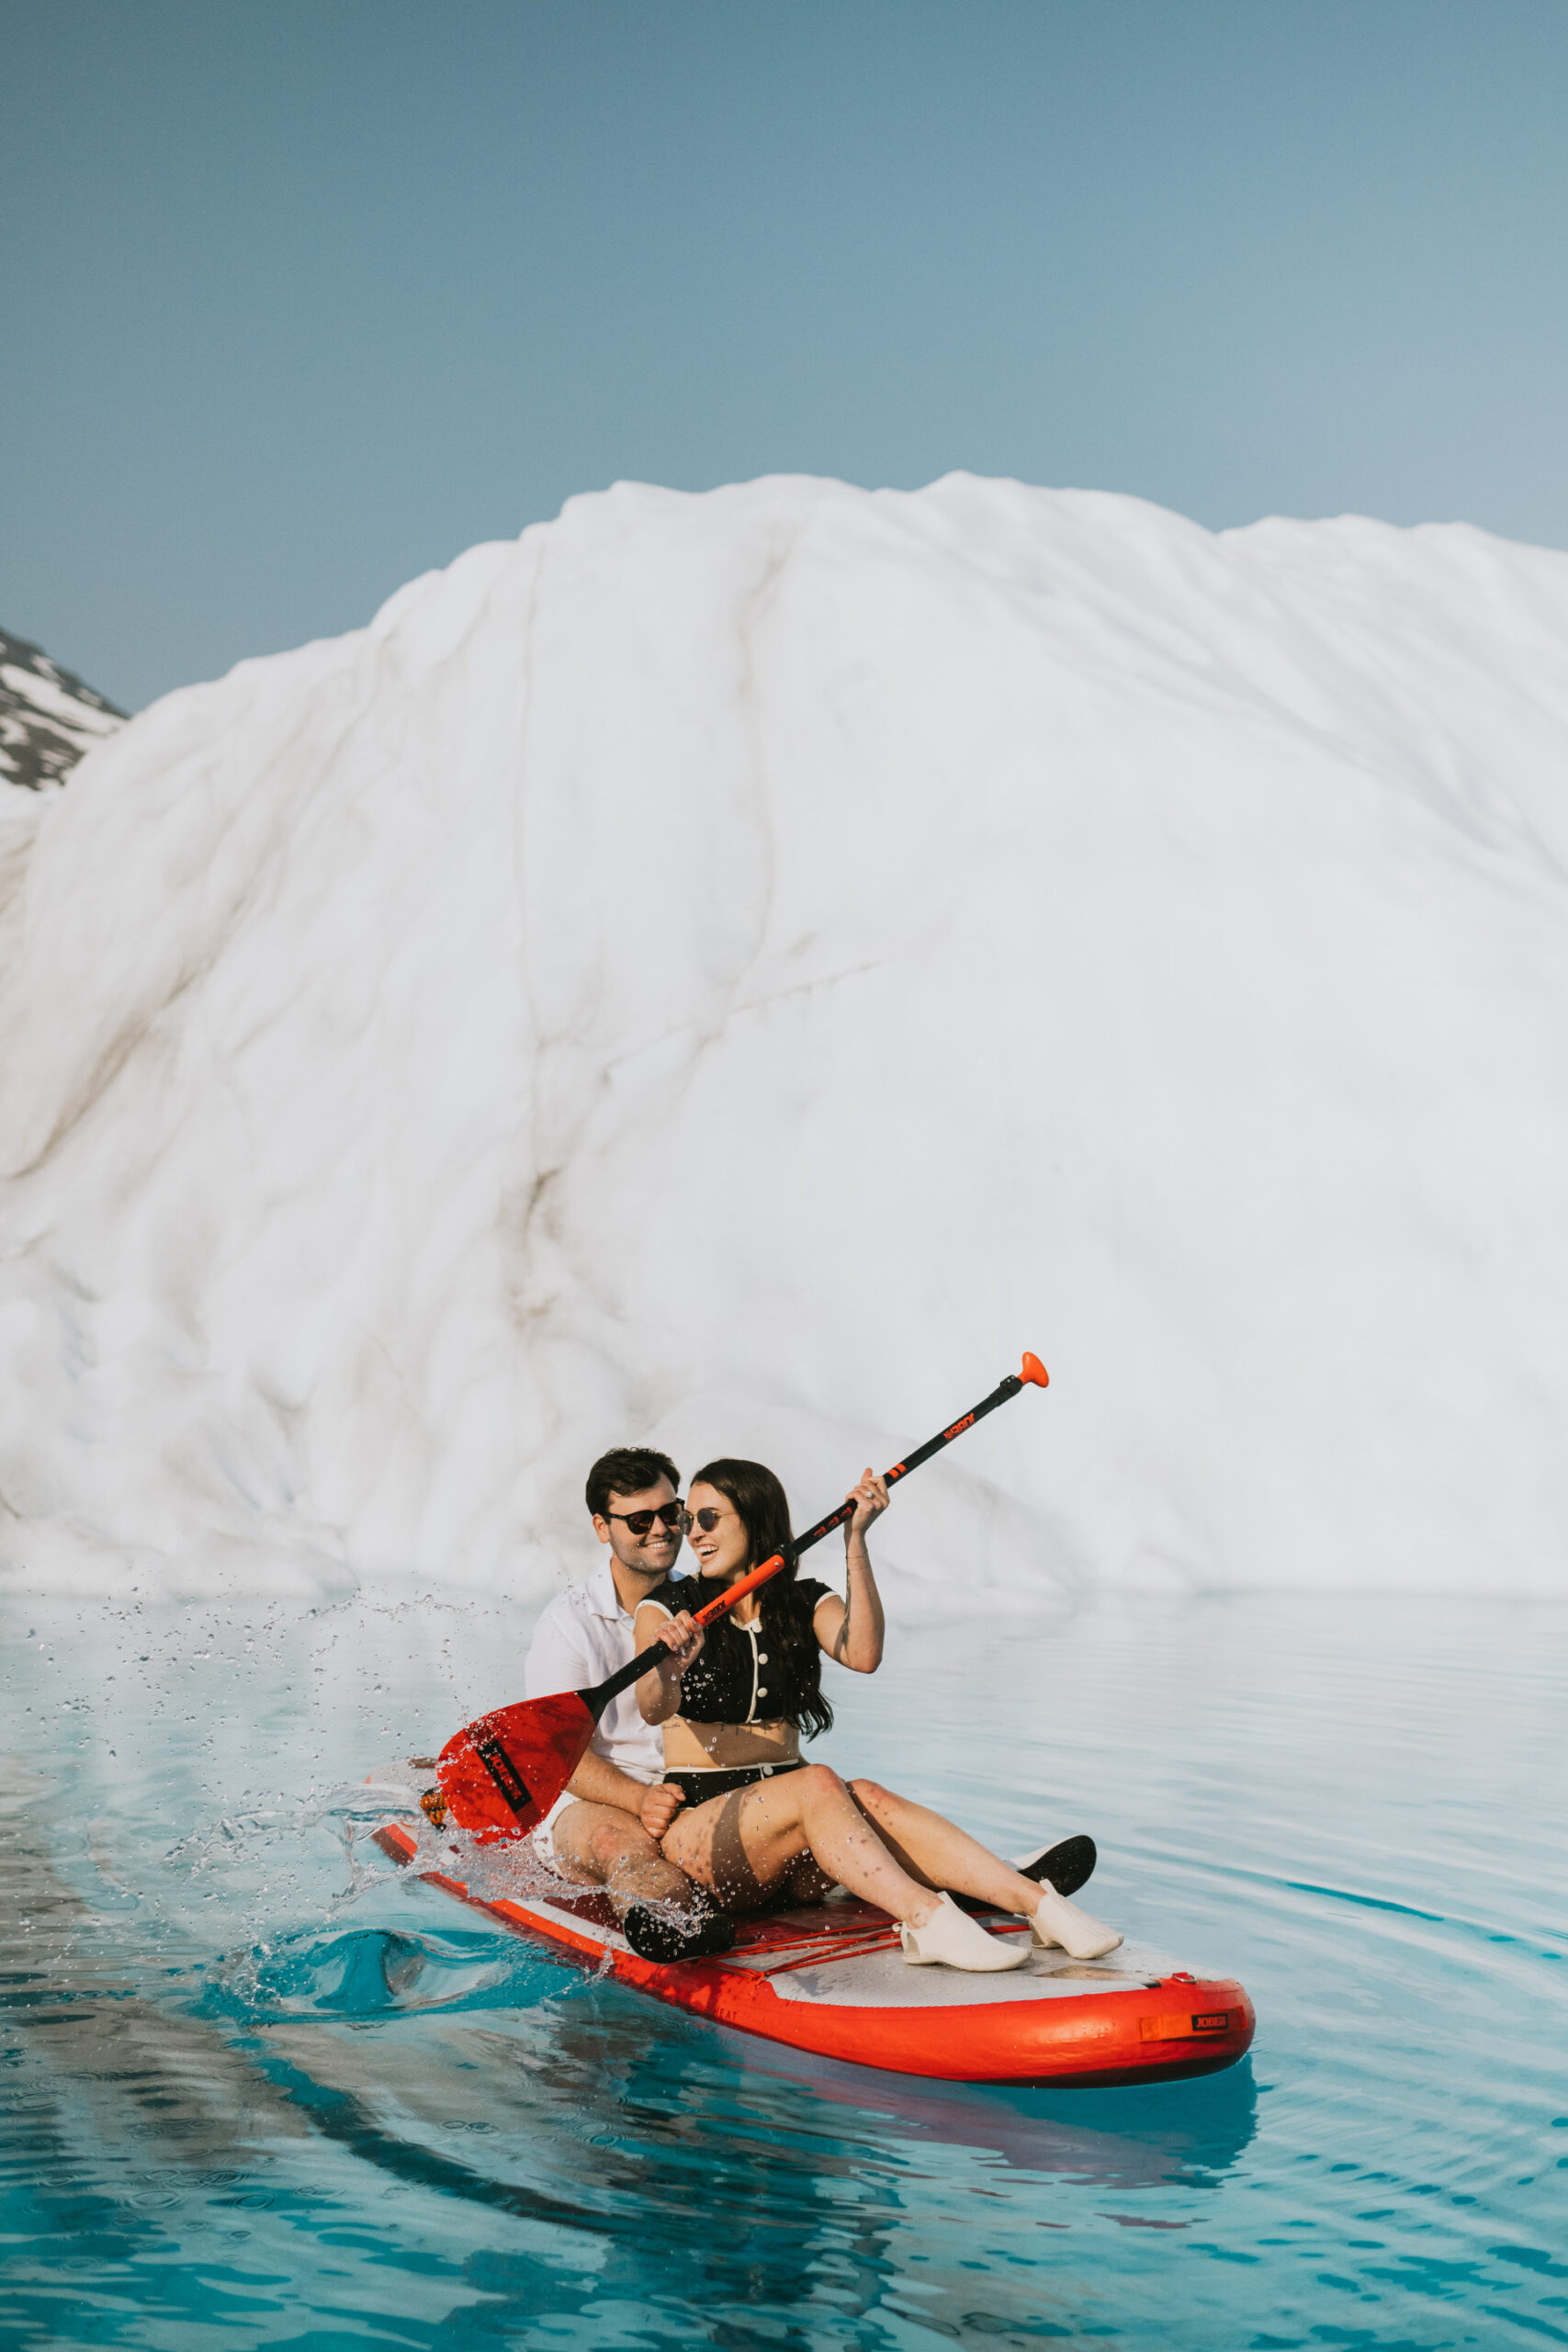 A couple paddle boarding in blue waters near a large white glacier, both smiling and paddling together.